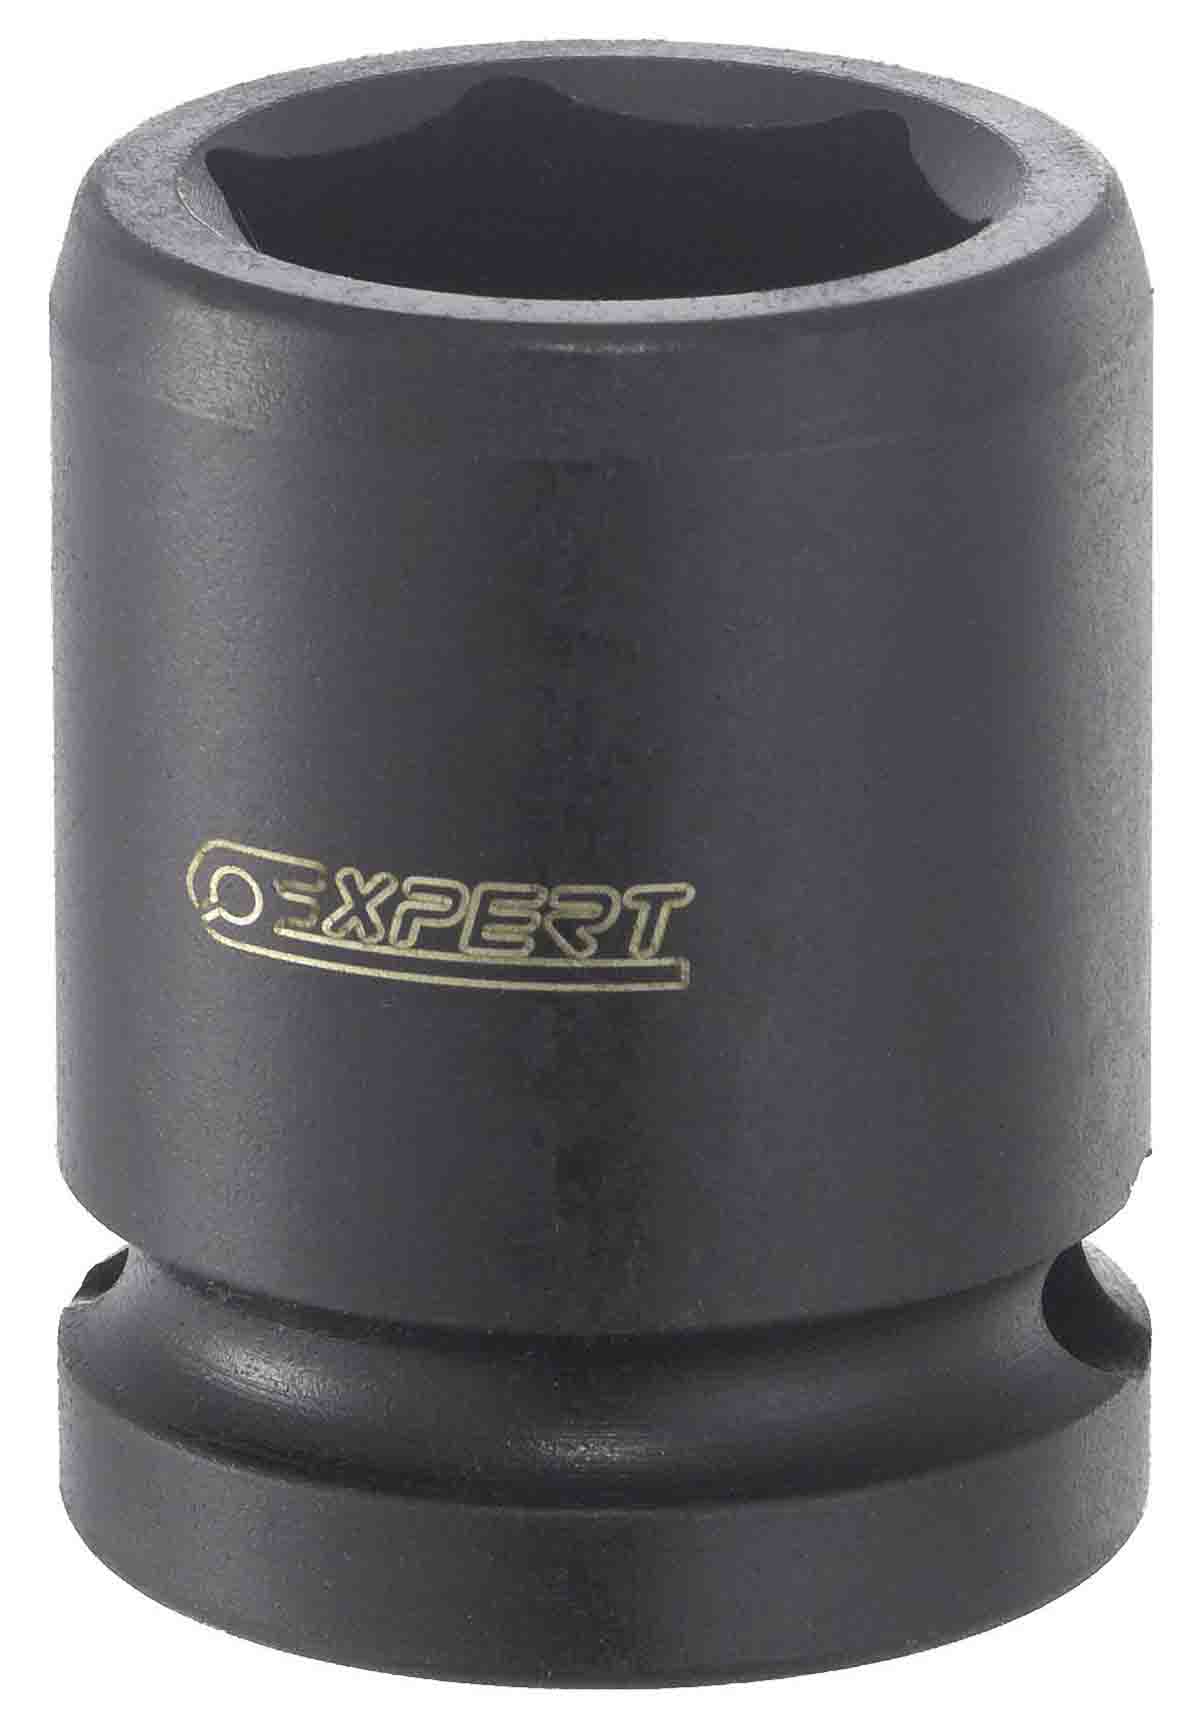 Expert by Facom 11mm, 1/2 in Drive Impact Socket Hexagon, 38 mm length